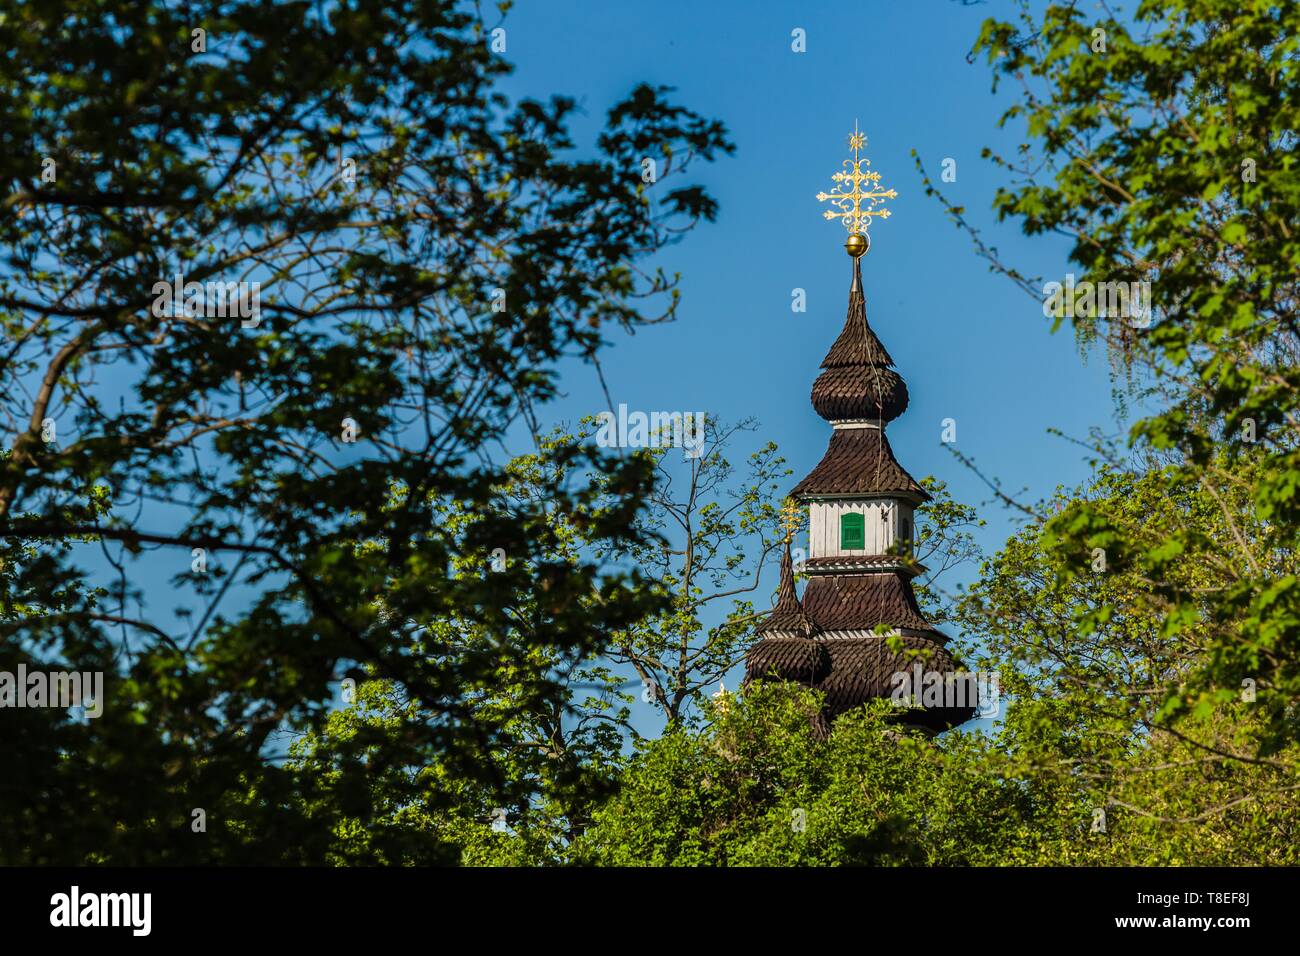 Prague, Czech Republic / Europe - April 22 2019: Spire of the church of the Archangel Michael built in 18th century. It has shingled roof. Stock Photo